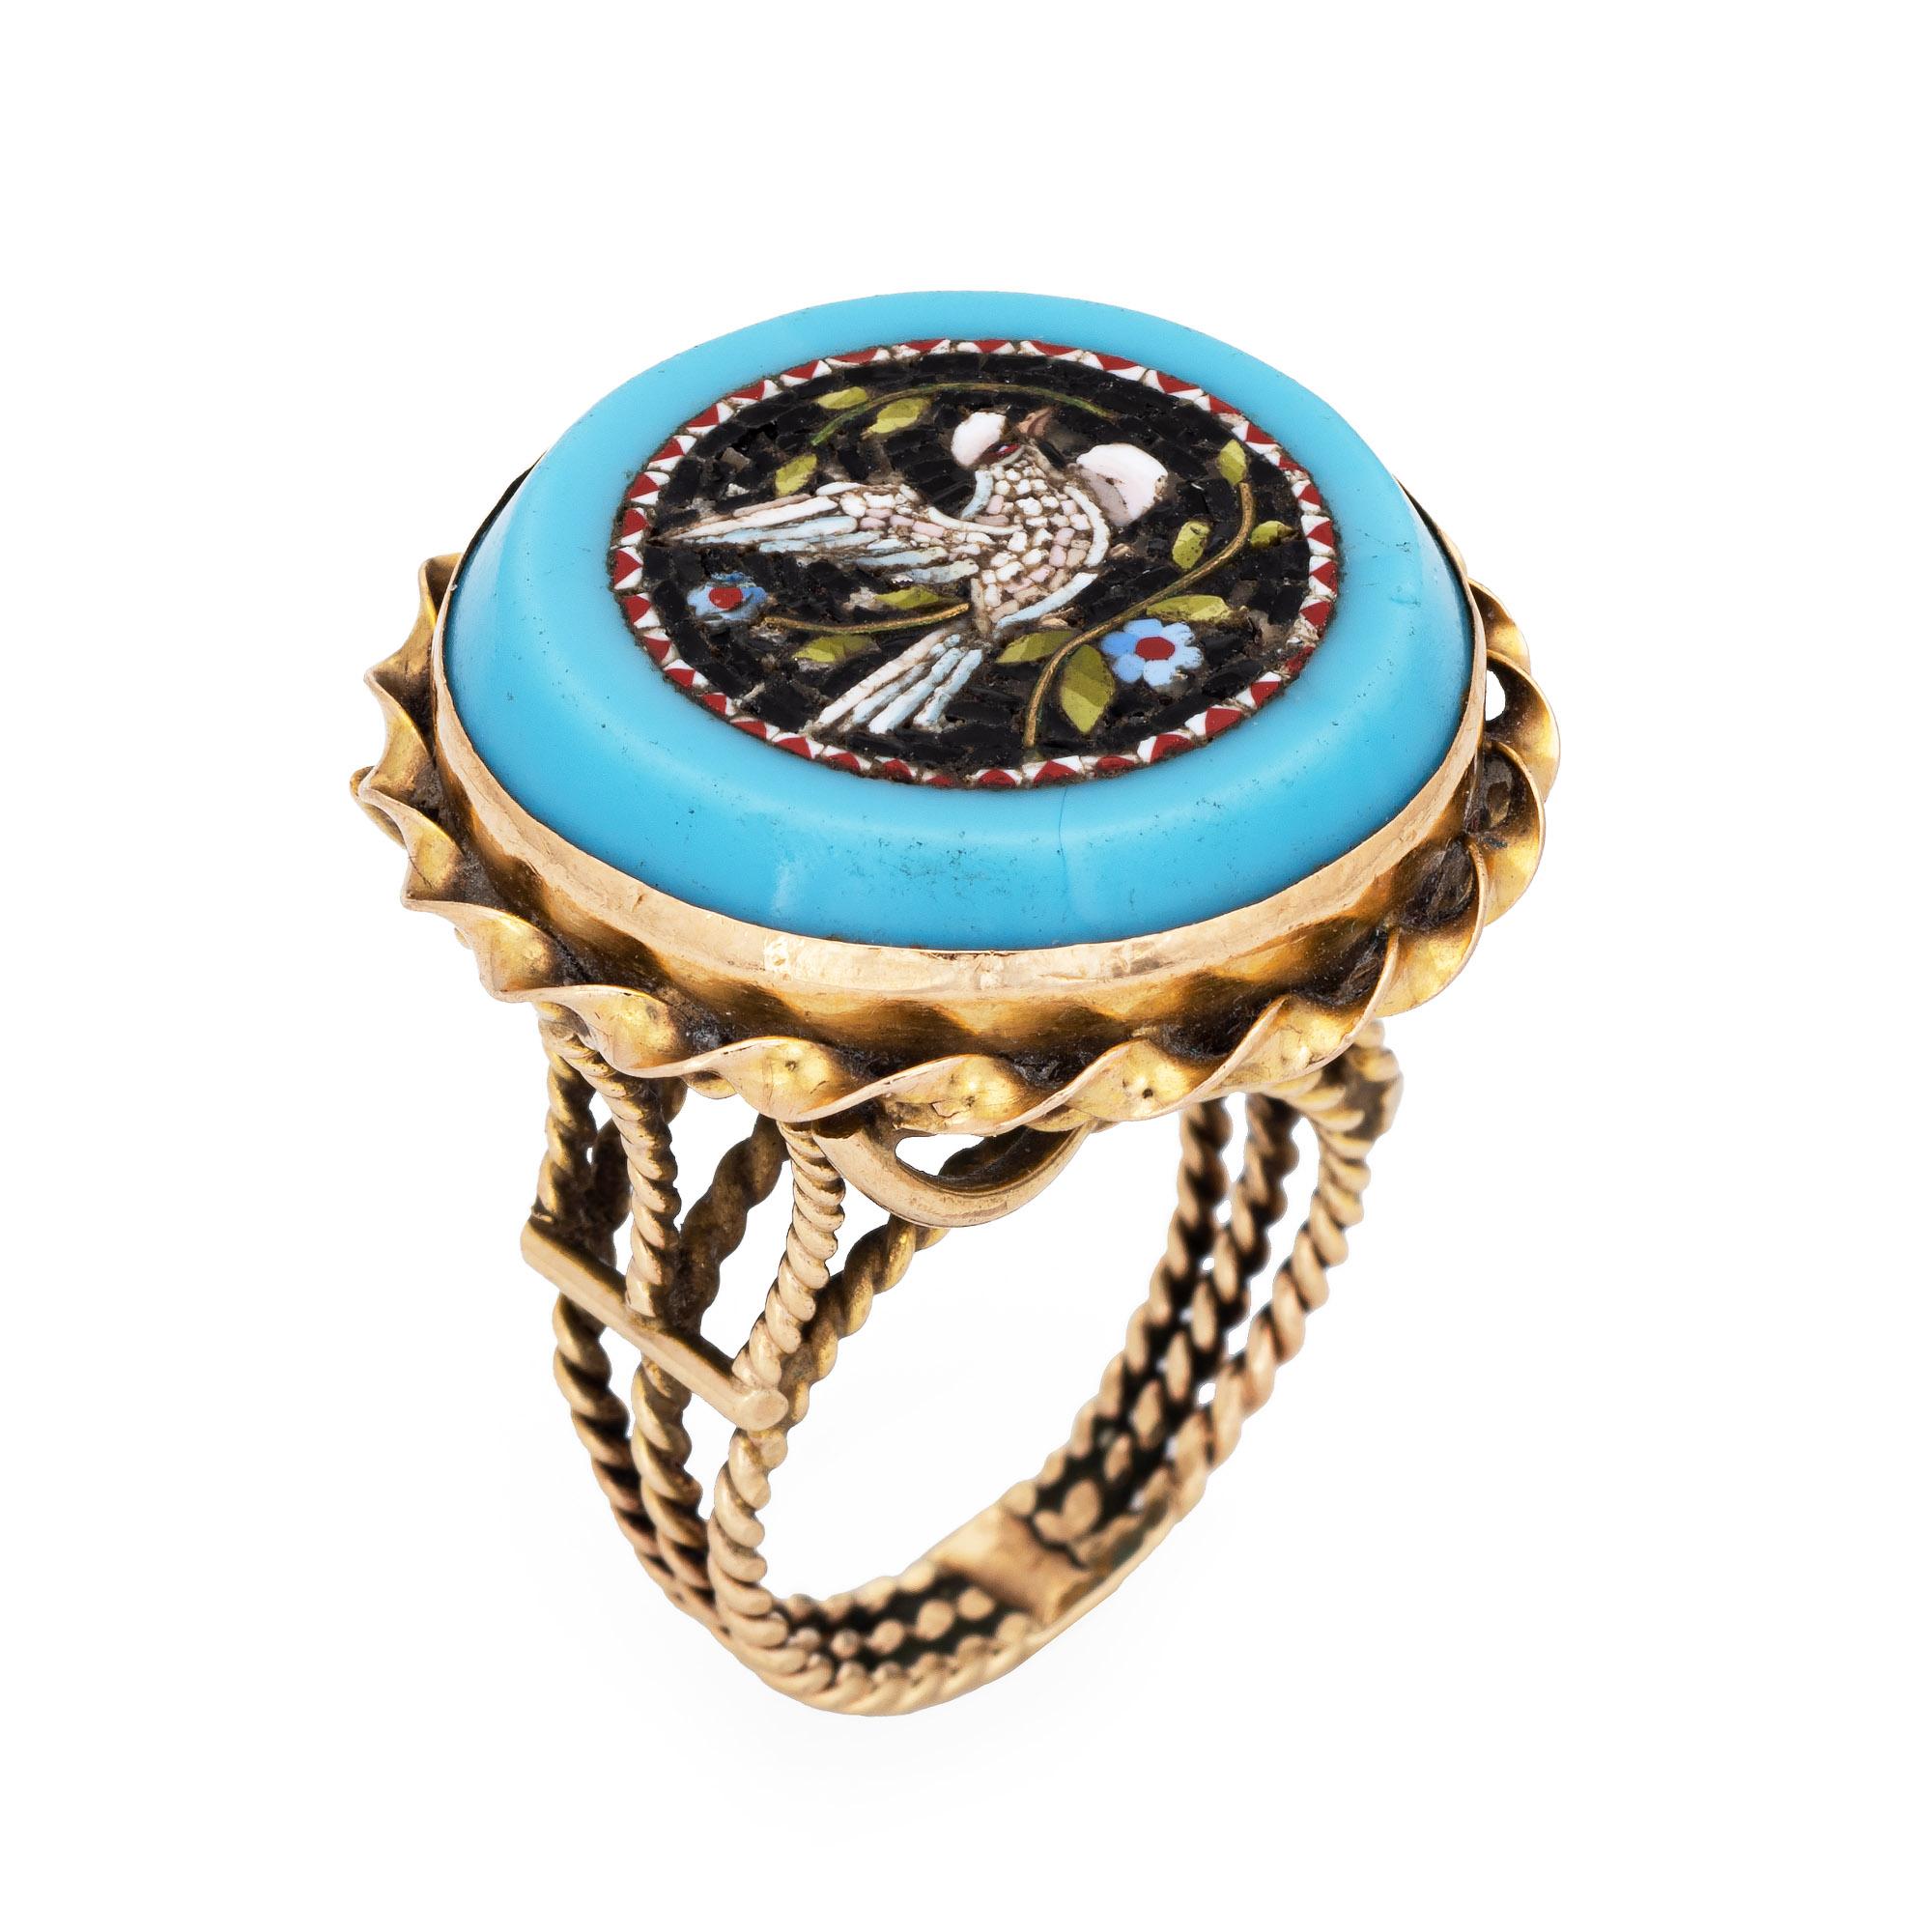 Finely detailed vintage micro mosaic cocktail ring crafted in 14 karat yellow gold. 

Tiny tiles of small colored glass form the image of a bird in full flight (we believe the bird is a dove), set flush into a blue stone mount. Micro mosaic jewelry